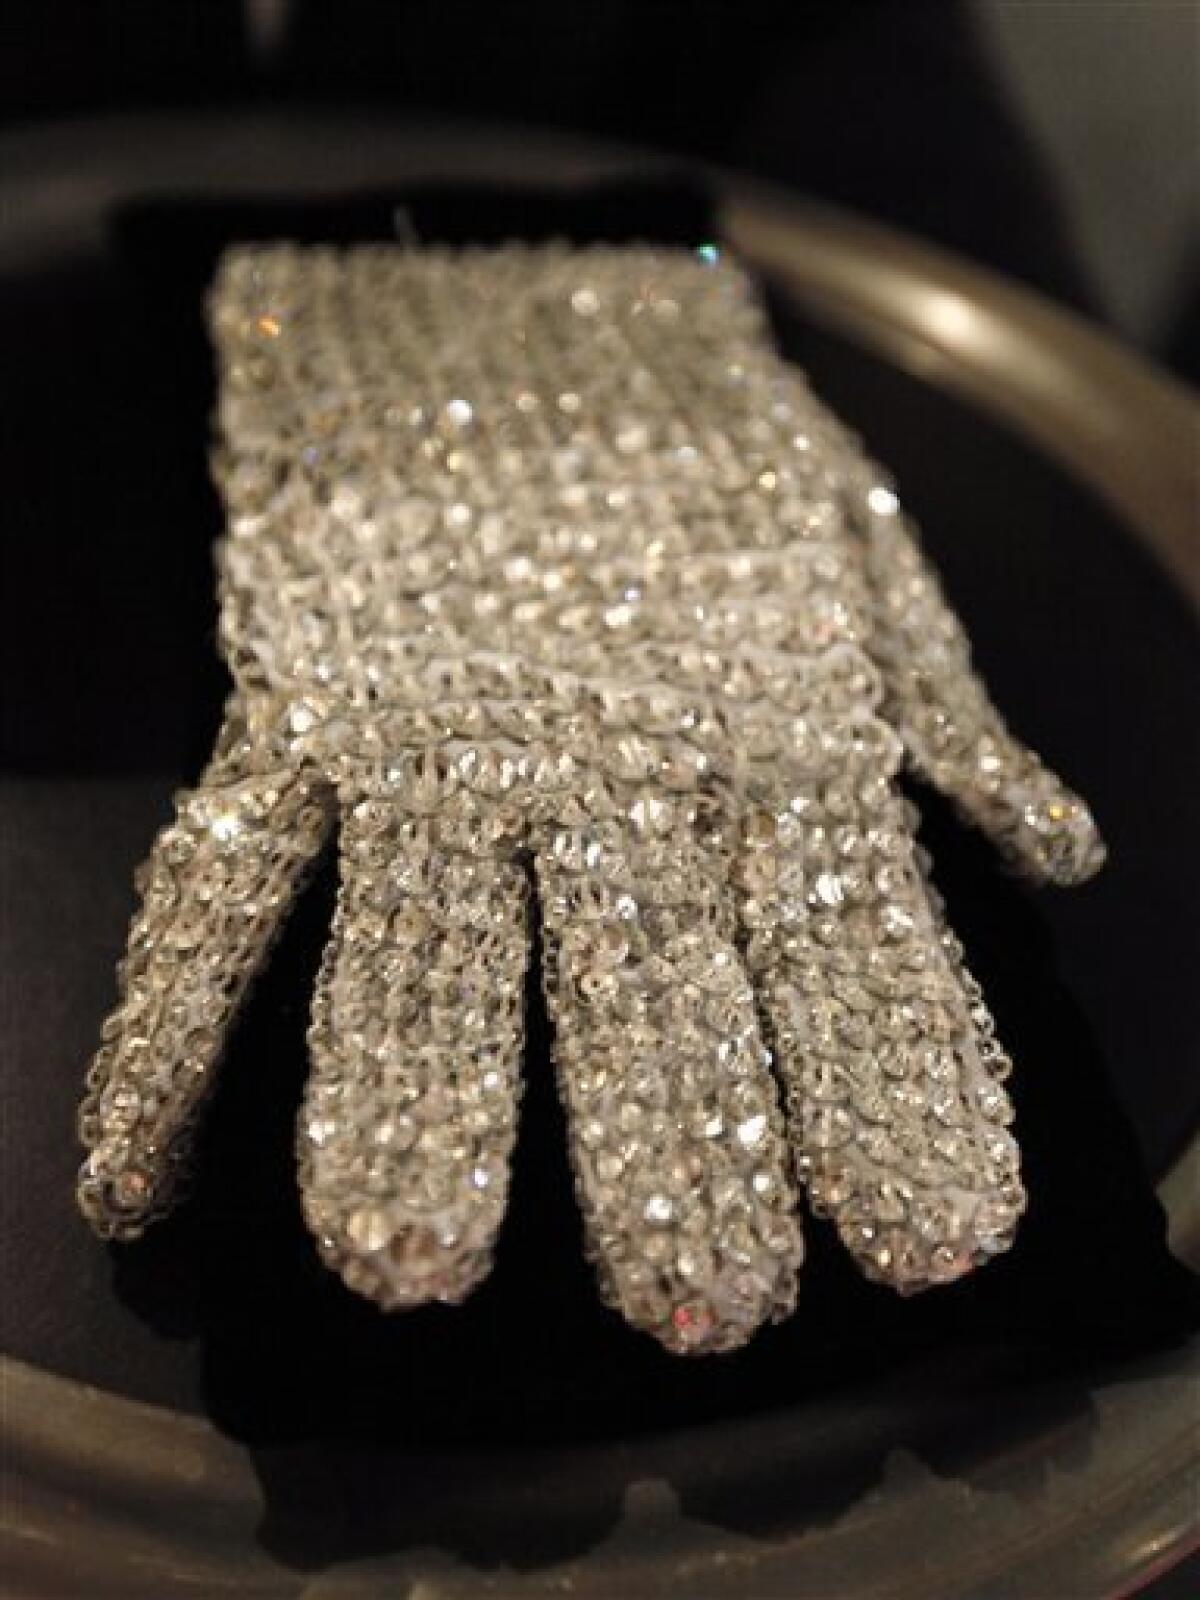 White Glove Reportedly Belonging To Michael Jackson Sells For Over